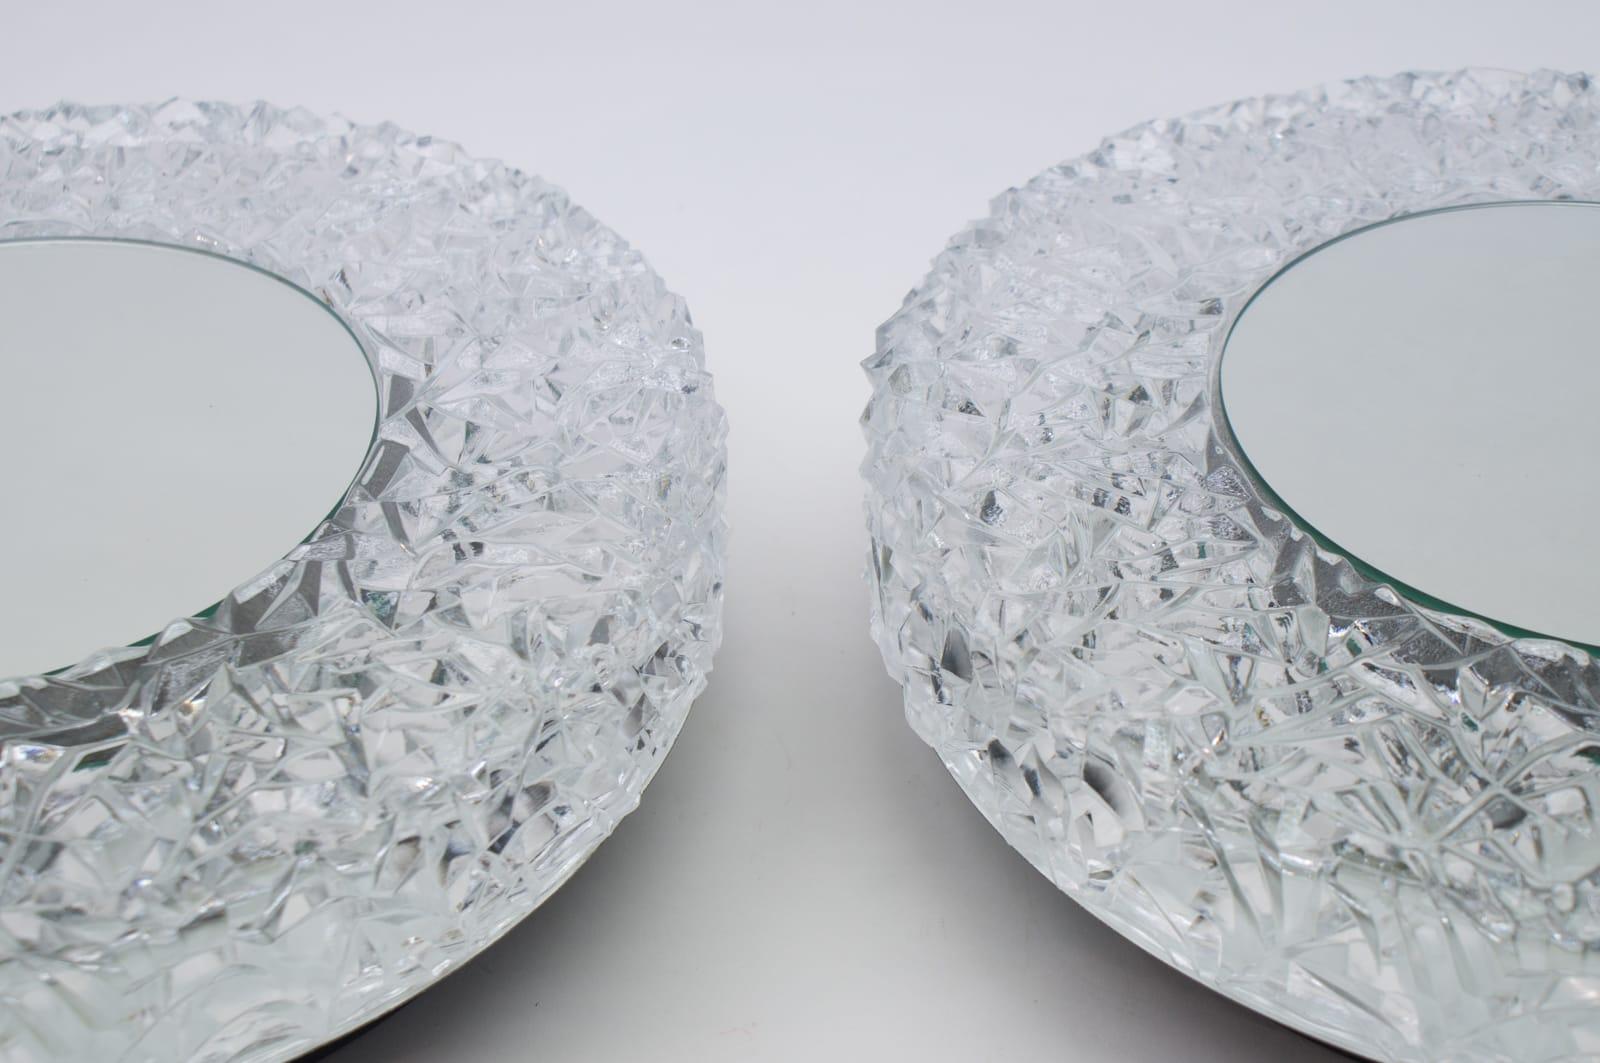 Set of 2 Textured Glass and Mirror Ceiling Wall Flushmounts, Hillebrand, 1960s For Sale 4